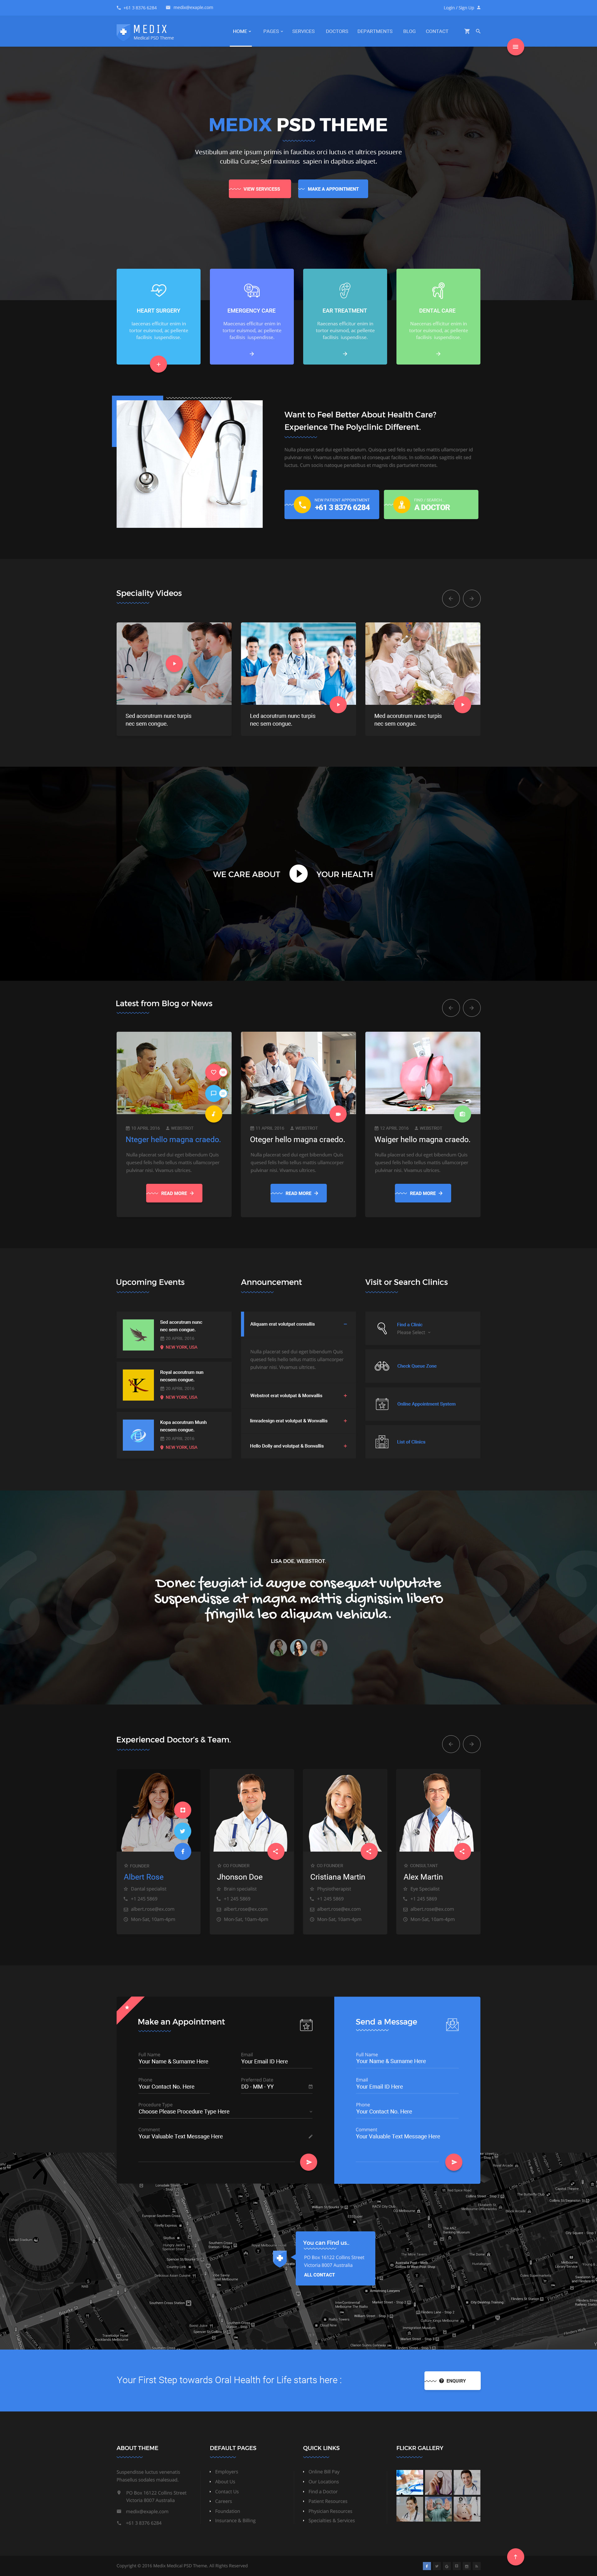 Medix - Medical, Doctor and Health Care PSD Template